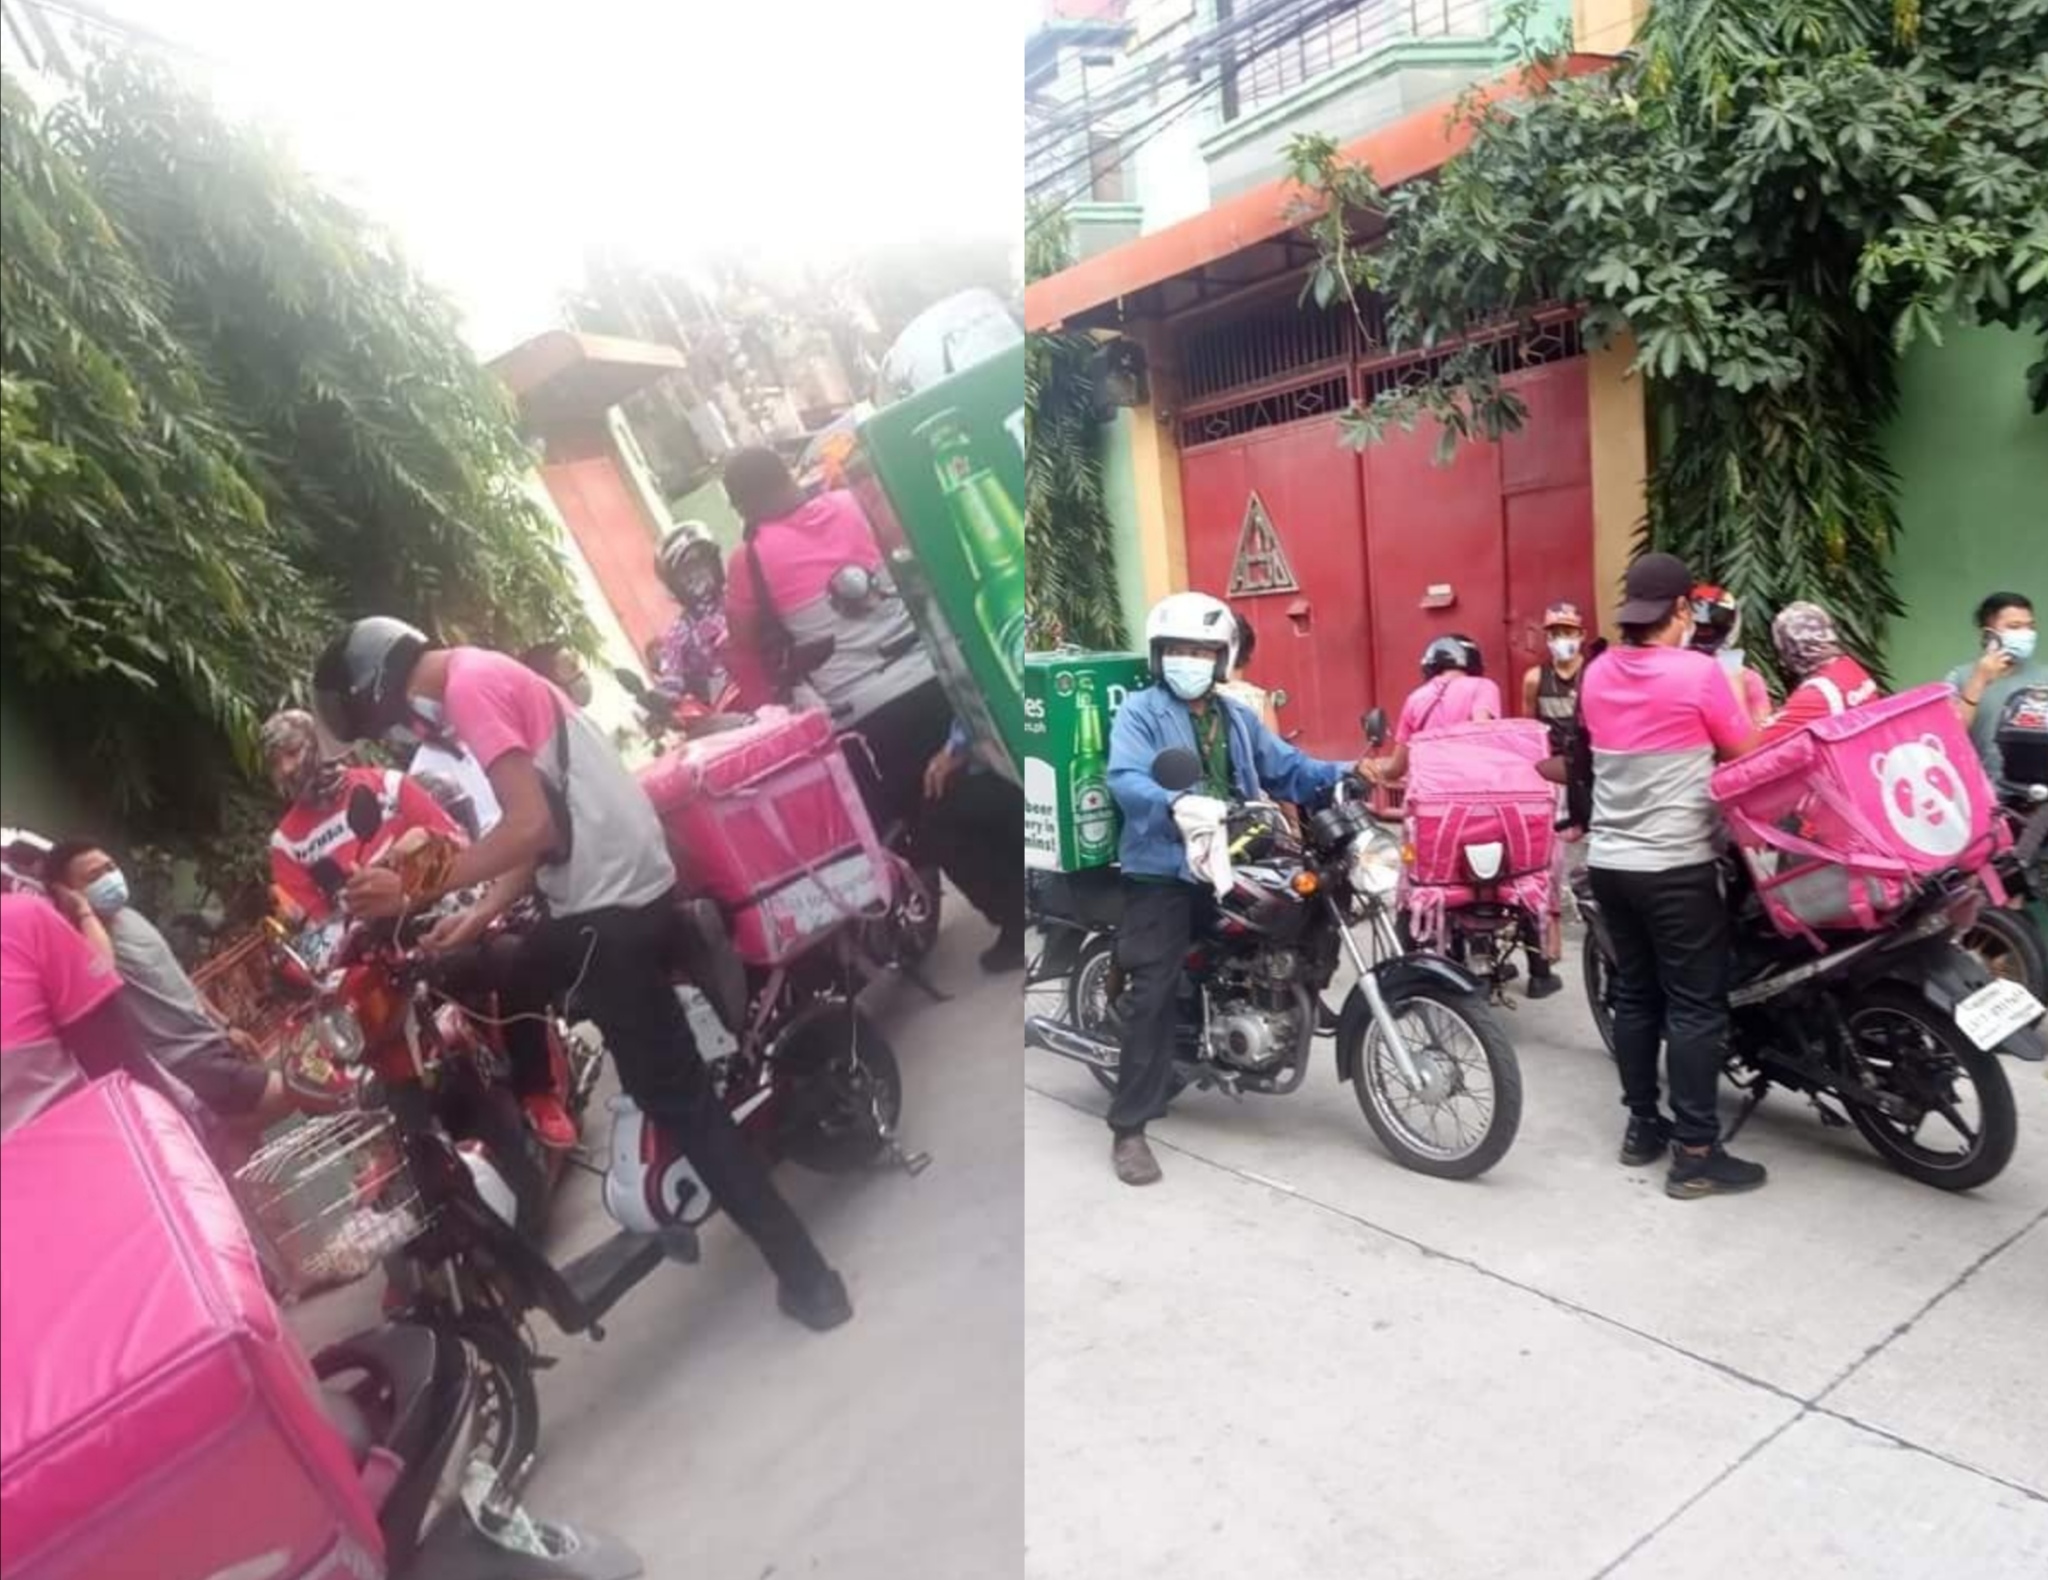 LOOK: Over 10 Food Delivery Riders Got Scammed by Fake ...